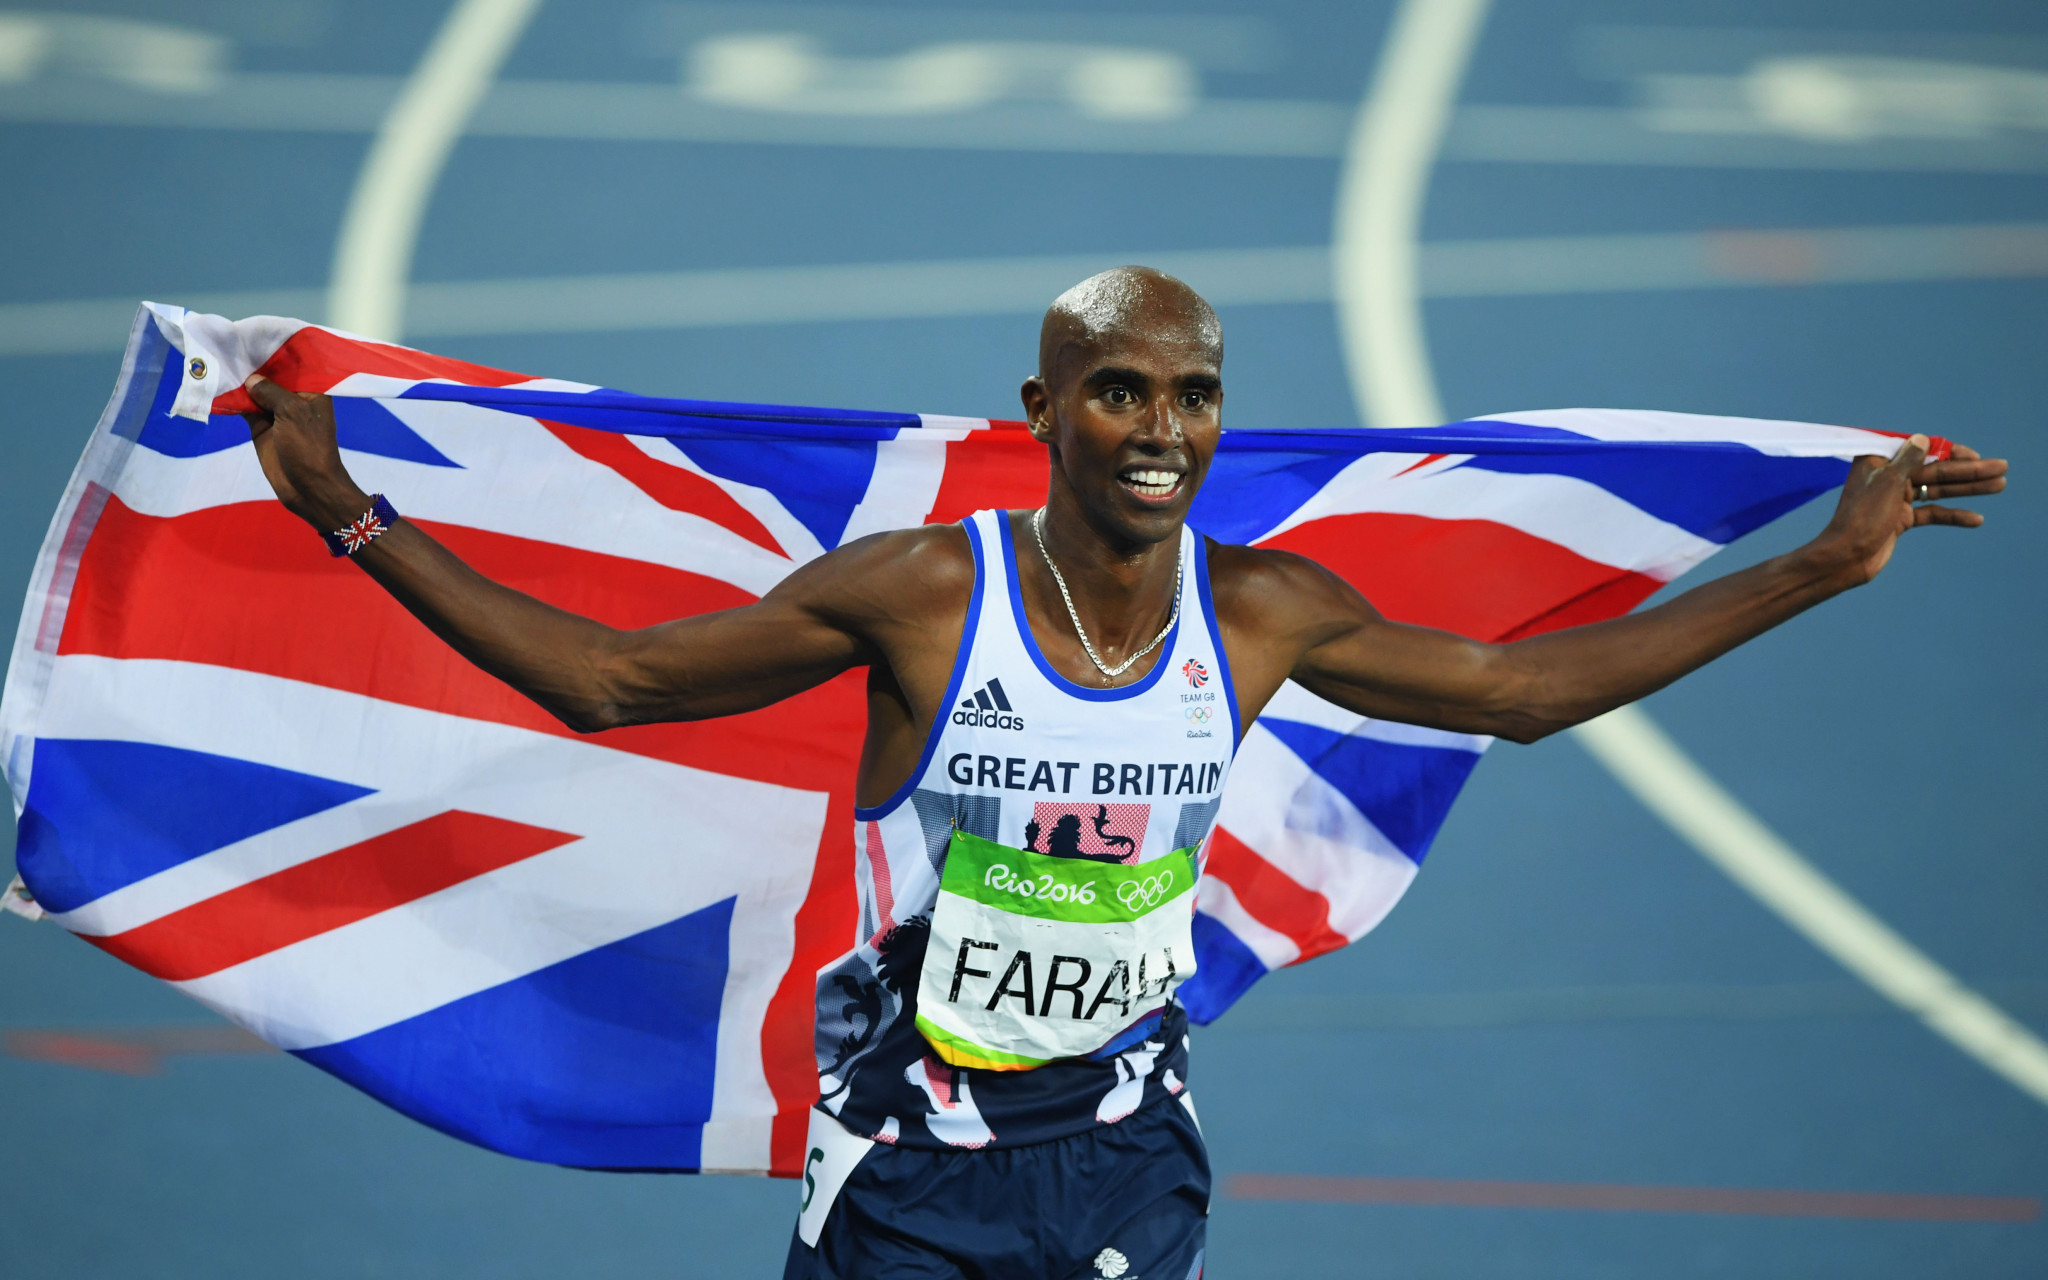 Joanna Coates rejected claims UK Athletics were trying to protect the medical data of Sir Mo Farah ©Getty Images